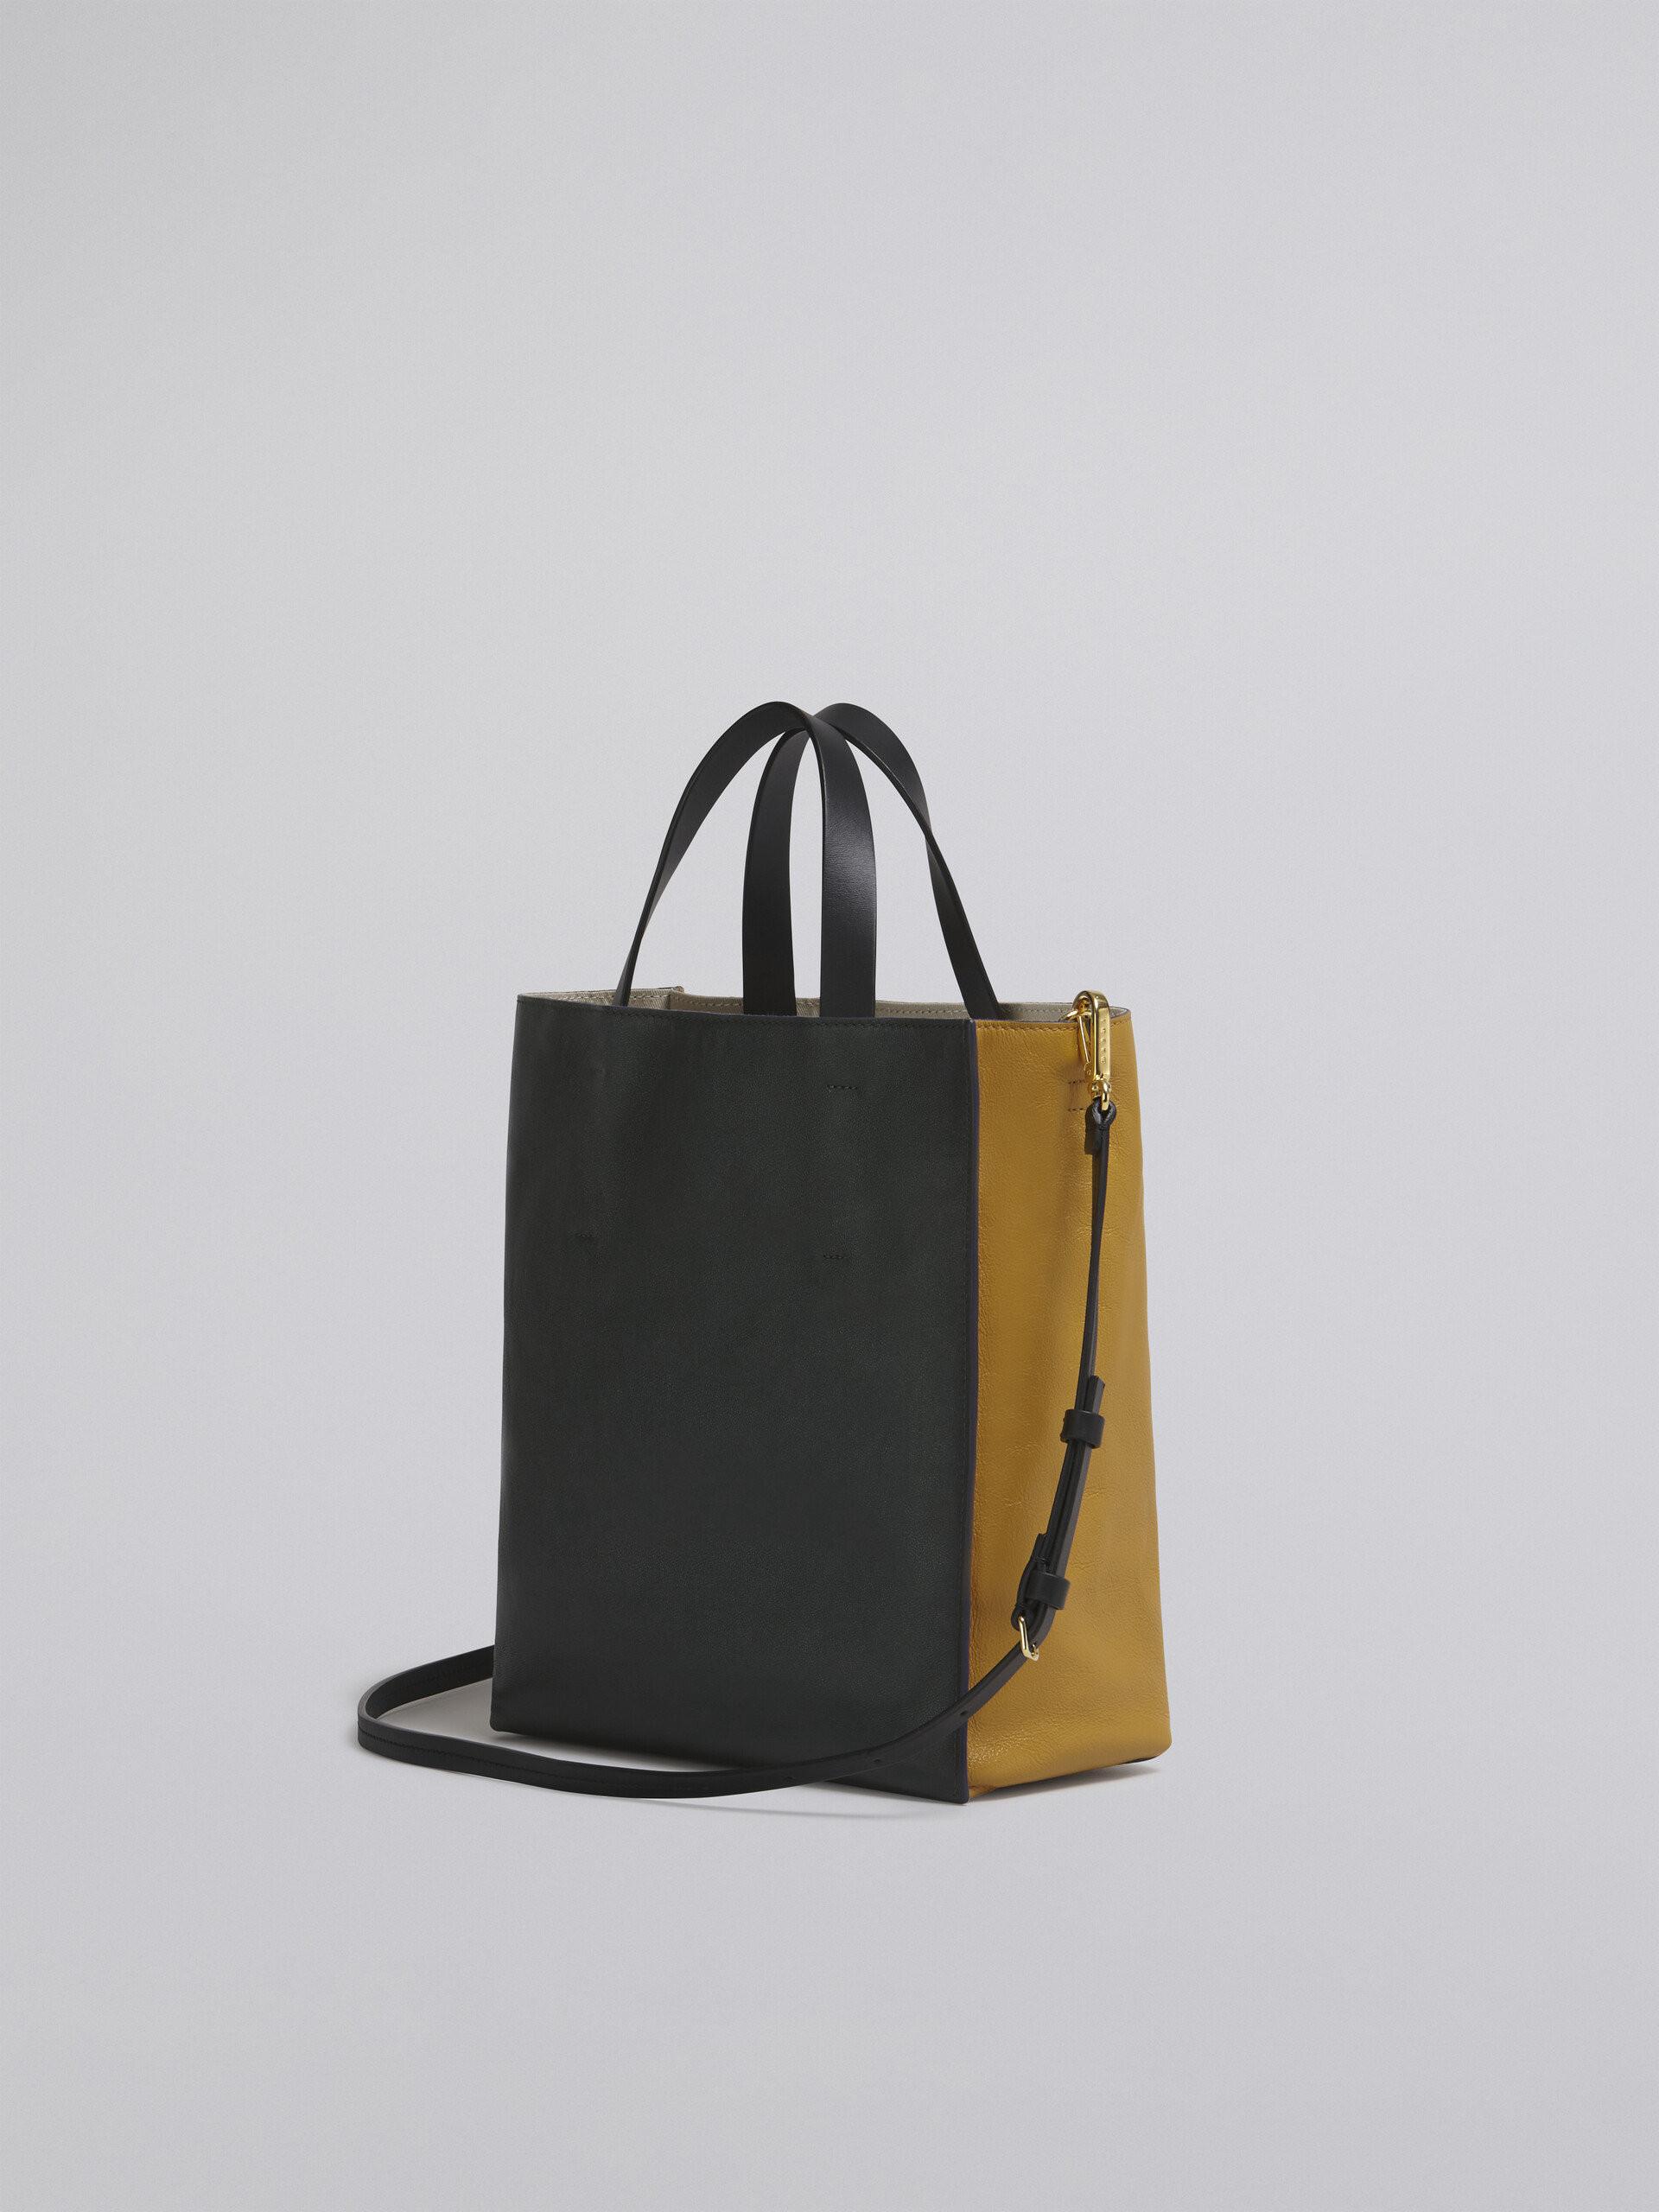 Yellow and green MUSEO SOFT bag in tumbled calfskin - Shopping Bags - Image 3